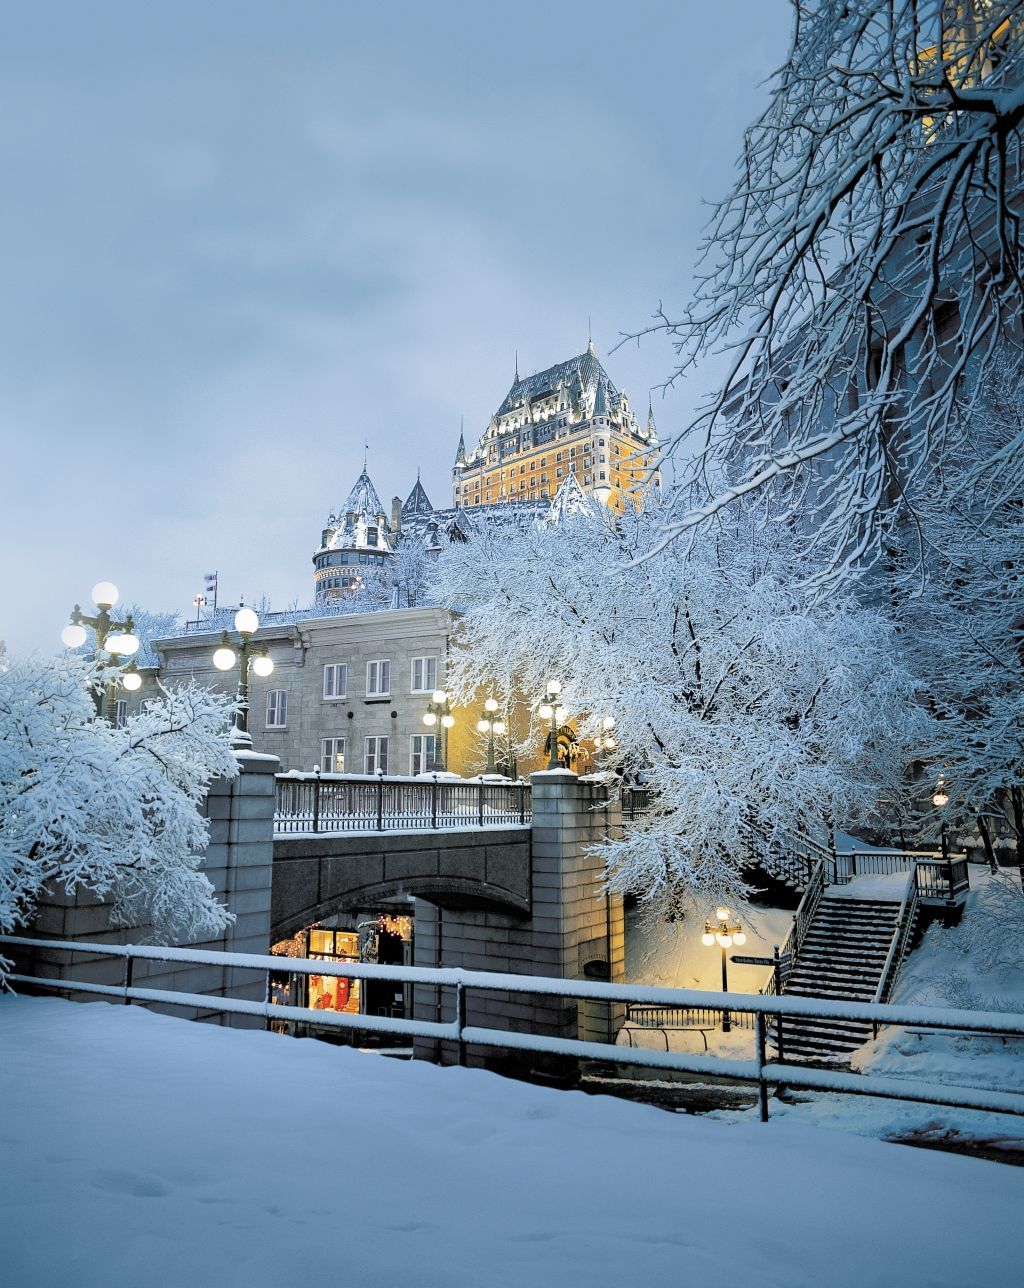 Le Chateau Frontenac in winter